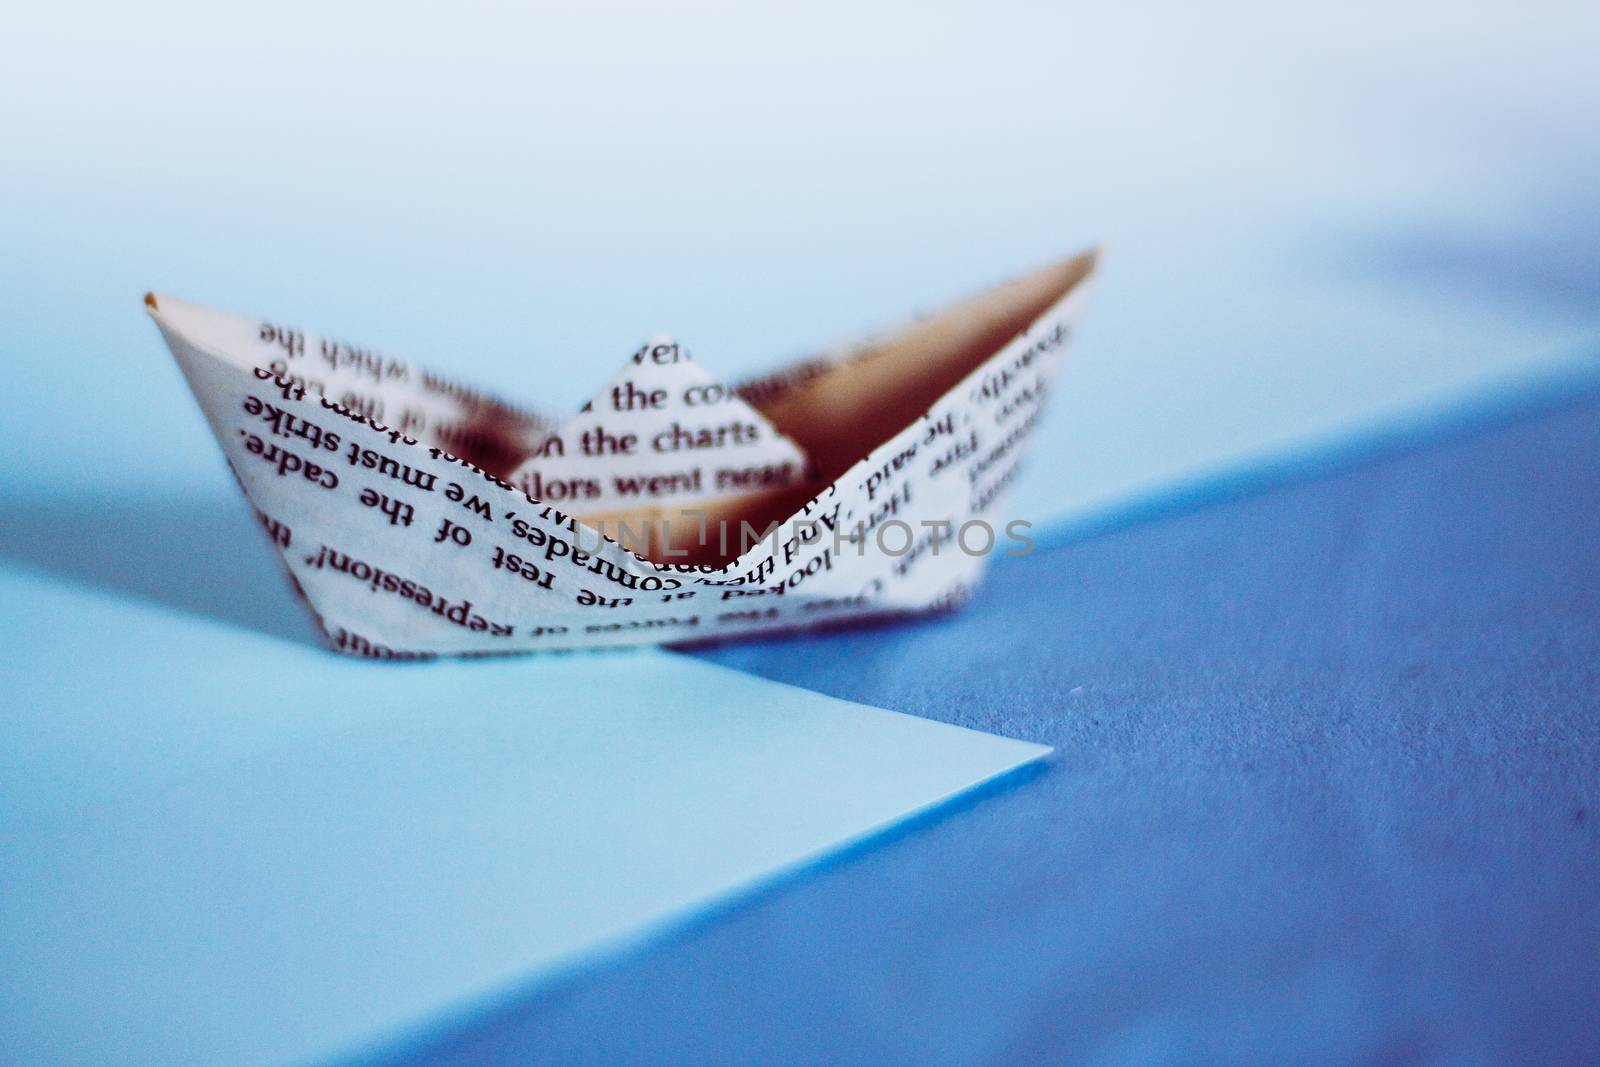 A paper boat made from old newspaper by Sonnet15